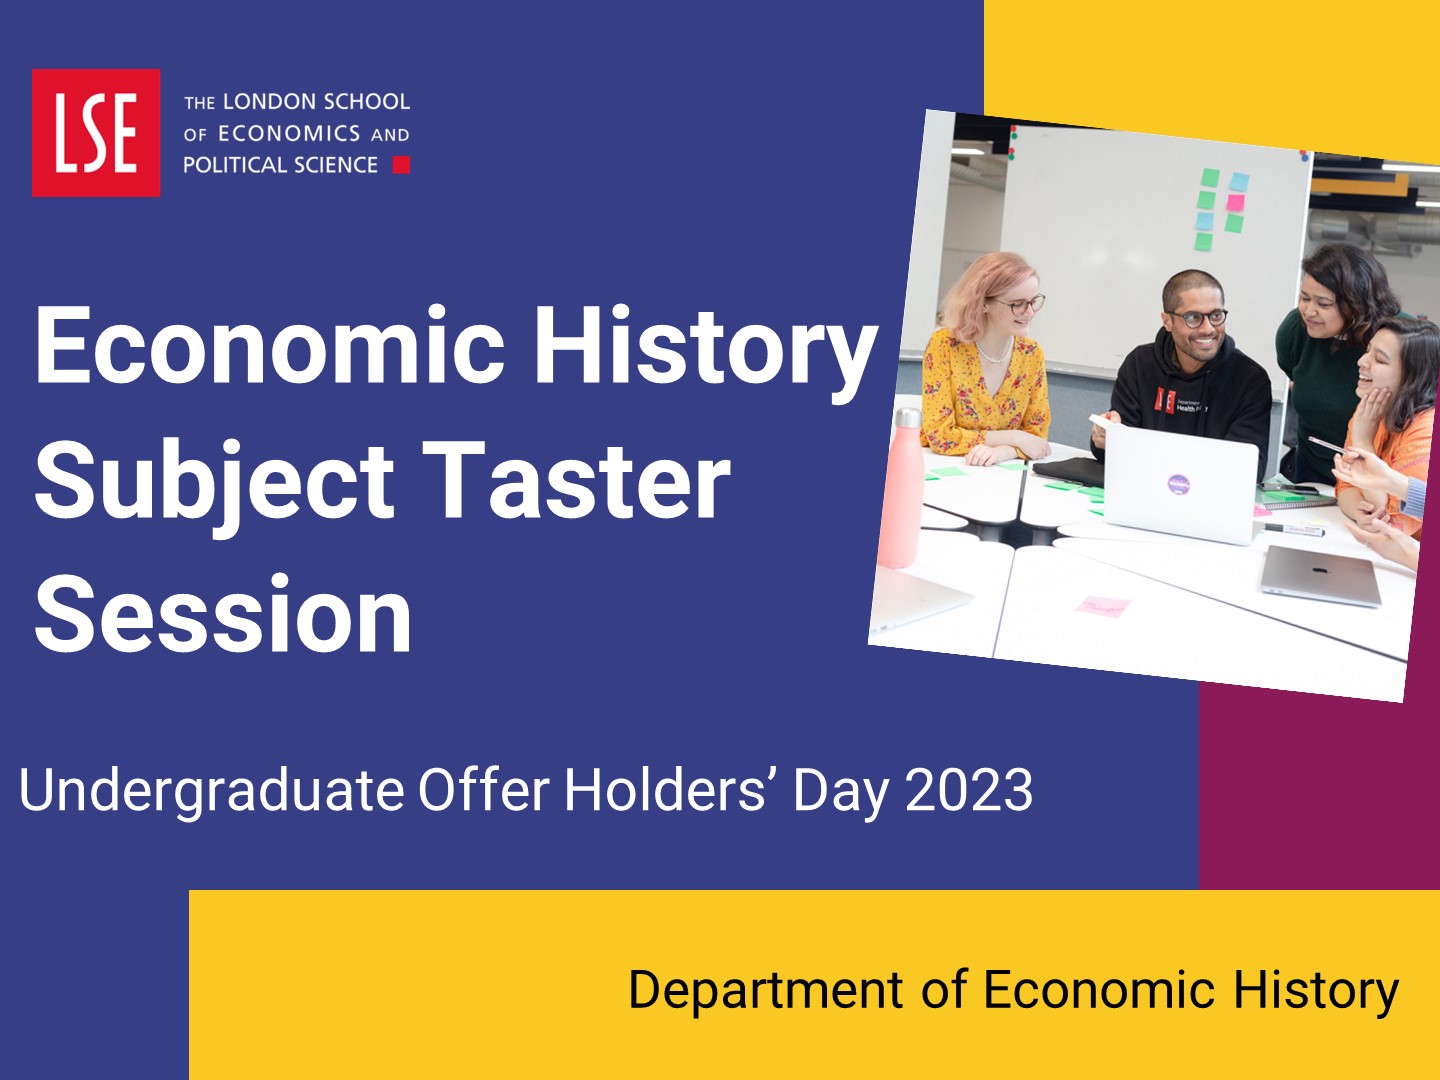 Watch the economic history subject taster session